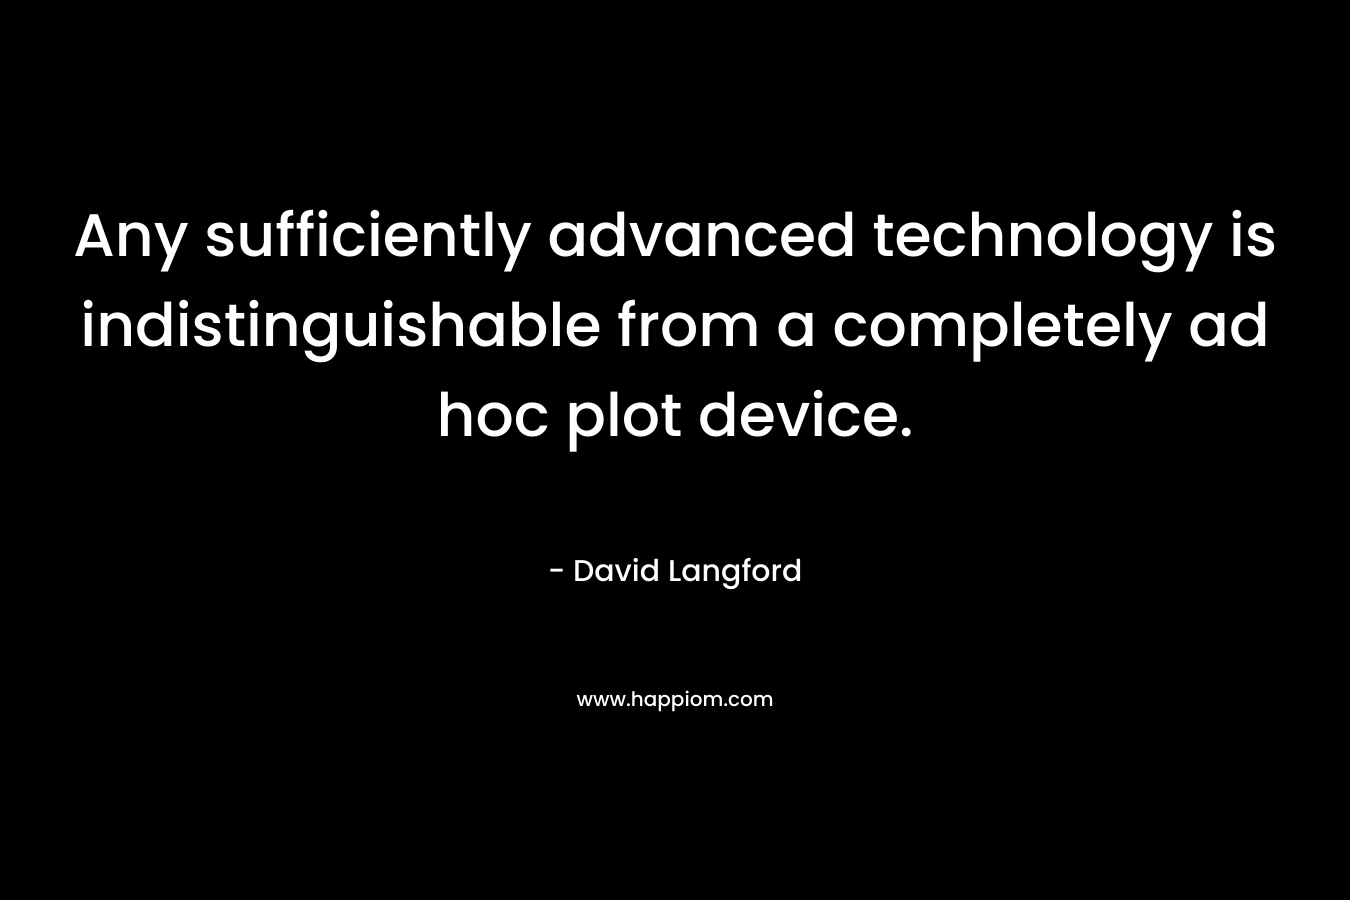 Any sufficiently advanced technology is indistinguishable from a completely ad hoc plot device.